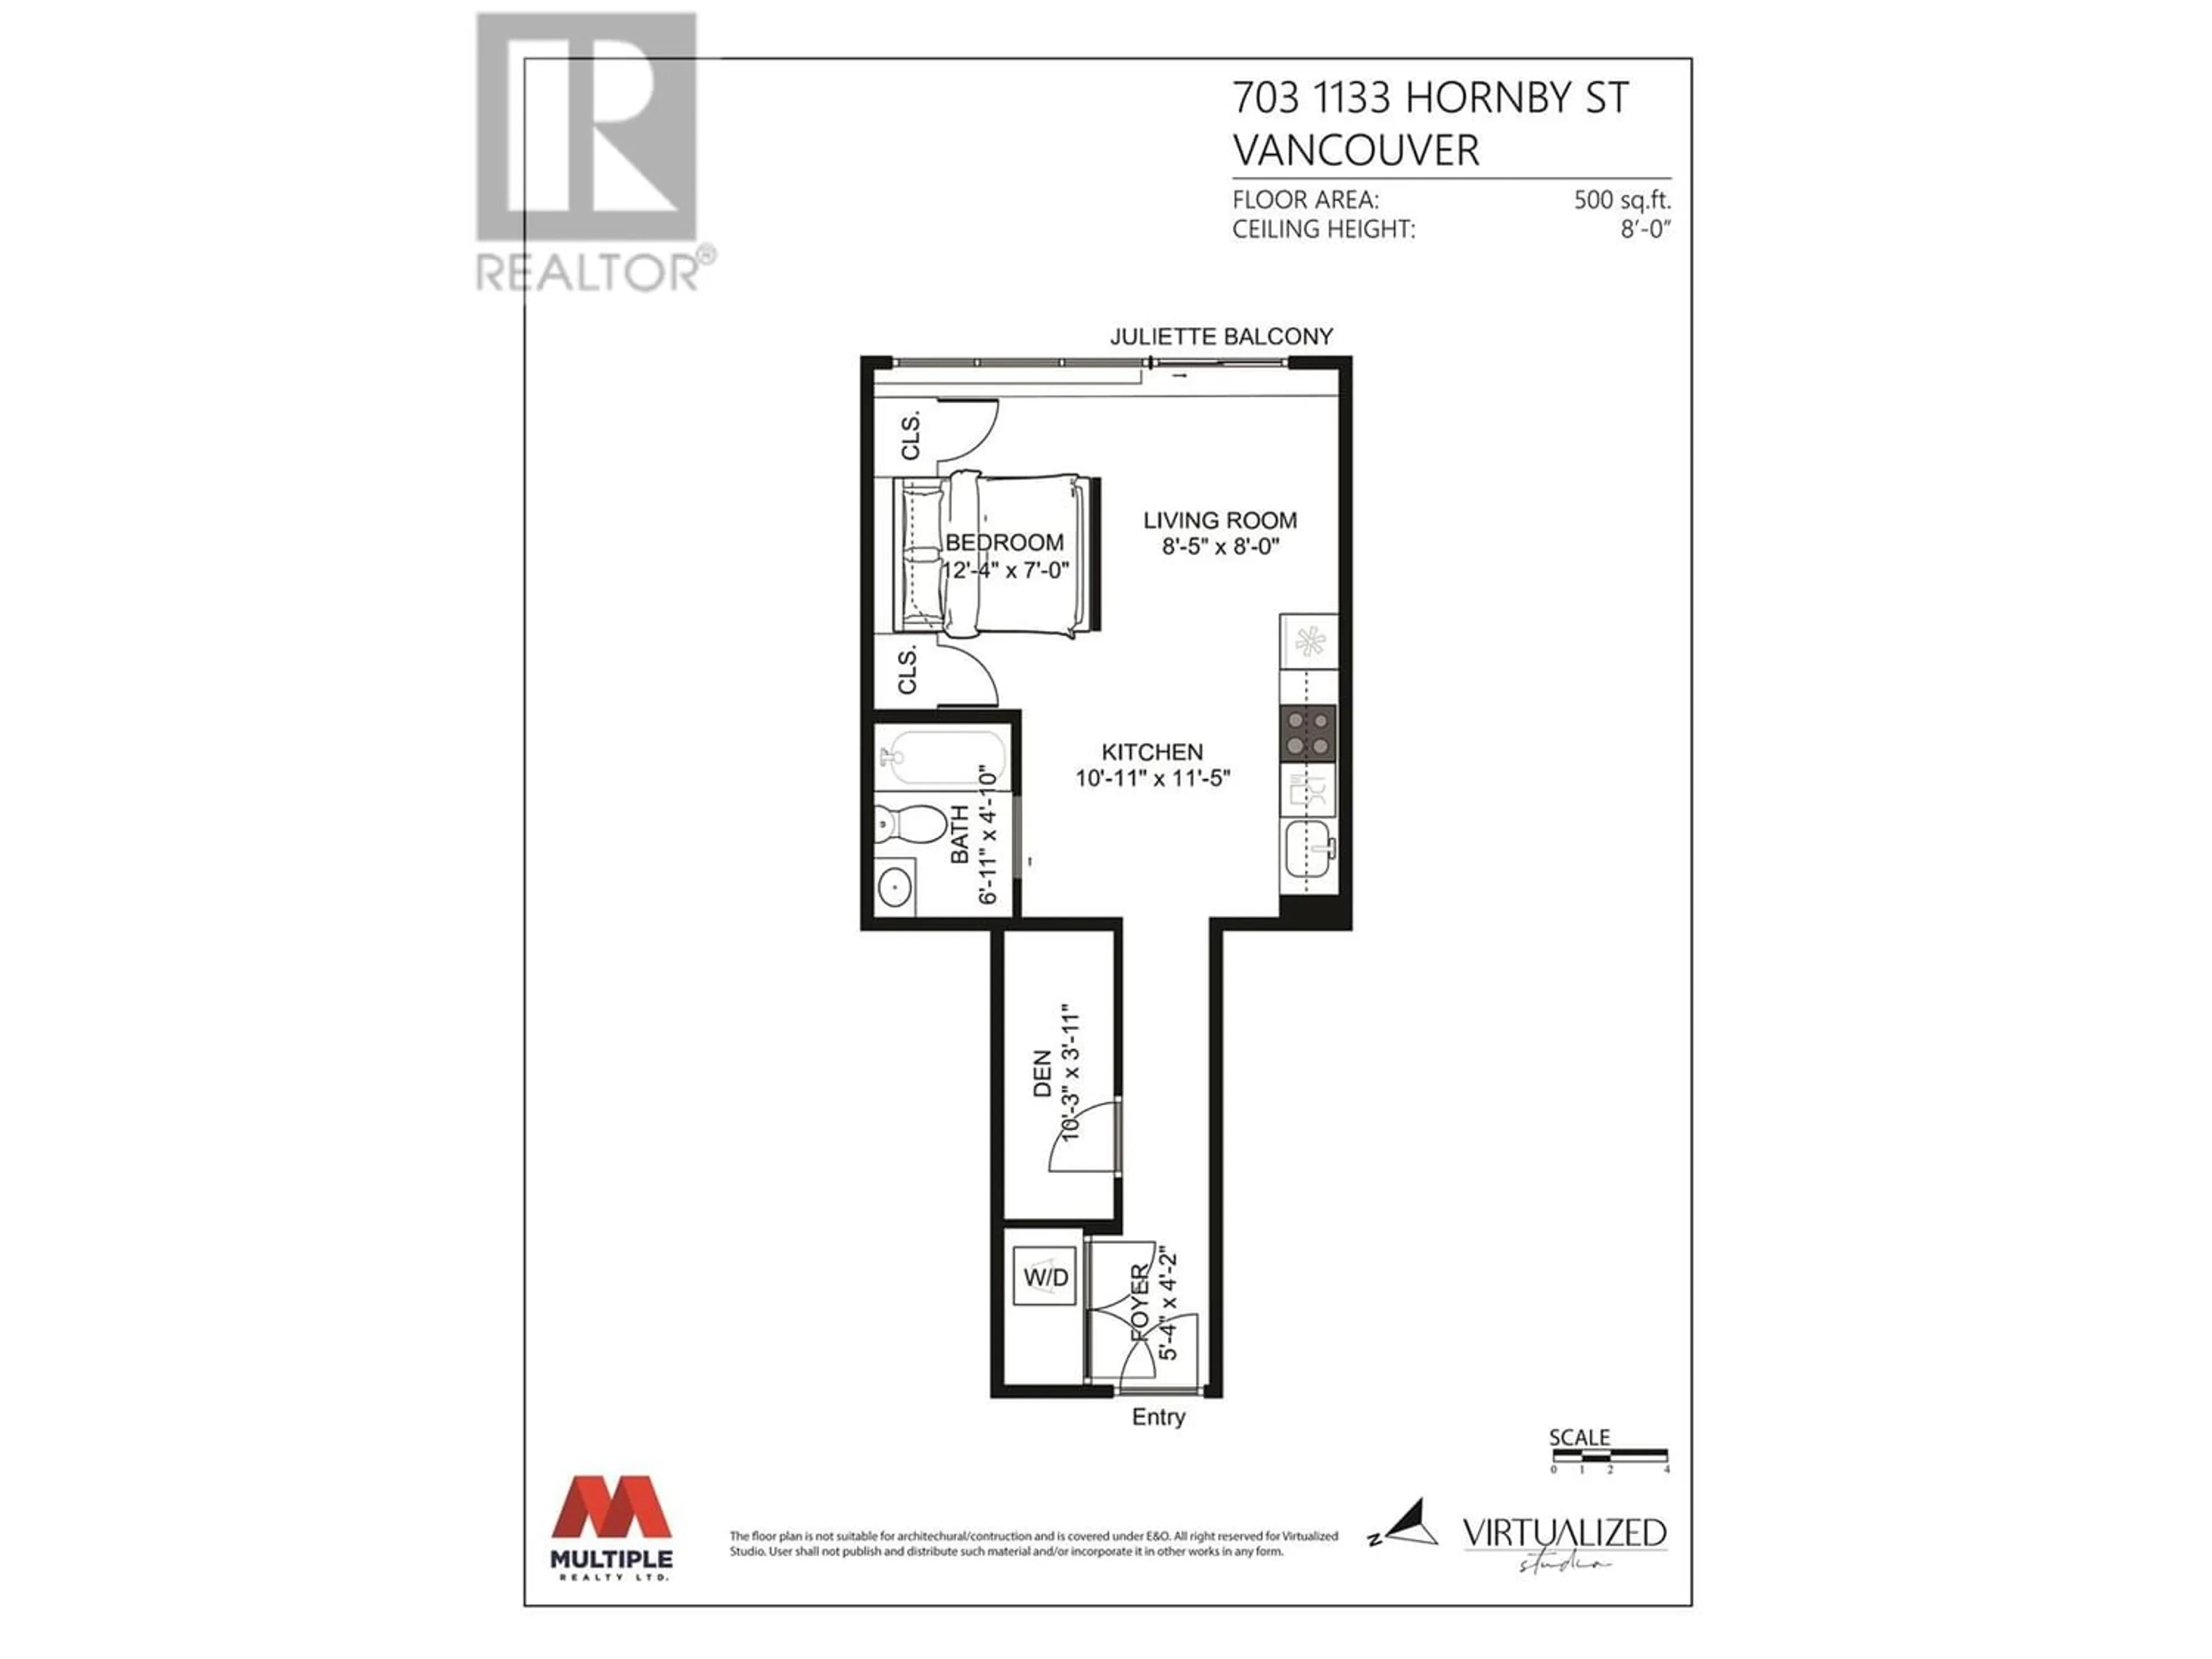 Floor plan for 703 1133 HORNBY STREET, Vancouver British Columbia V6Z1W1